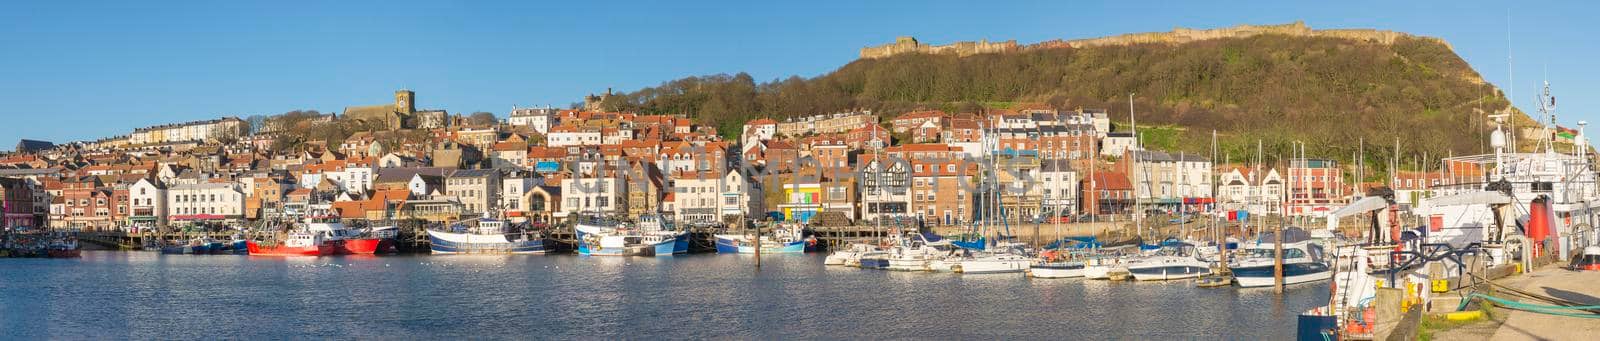 Landscape panorama view of coastal seaside town harbor front with pleasure craft marina and medieval castle on hill headland